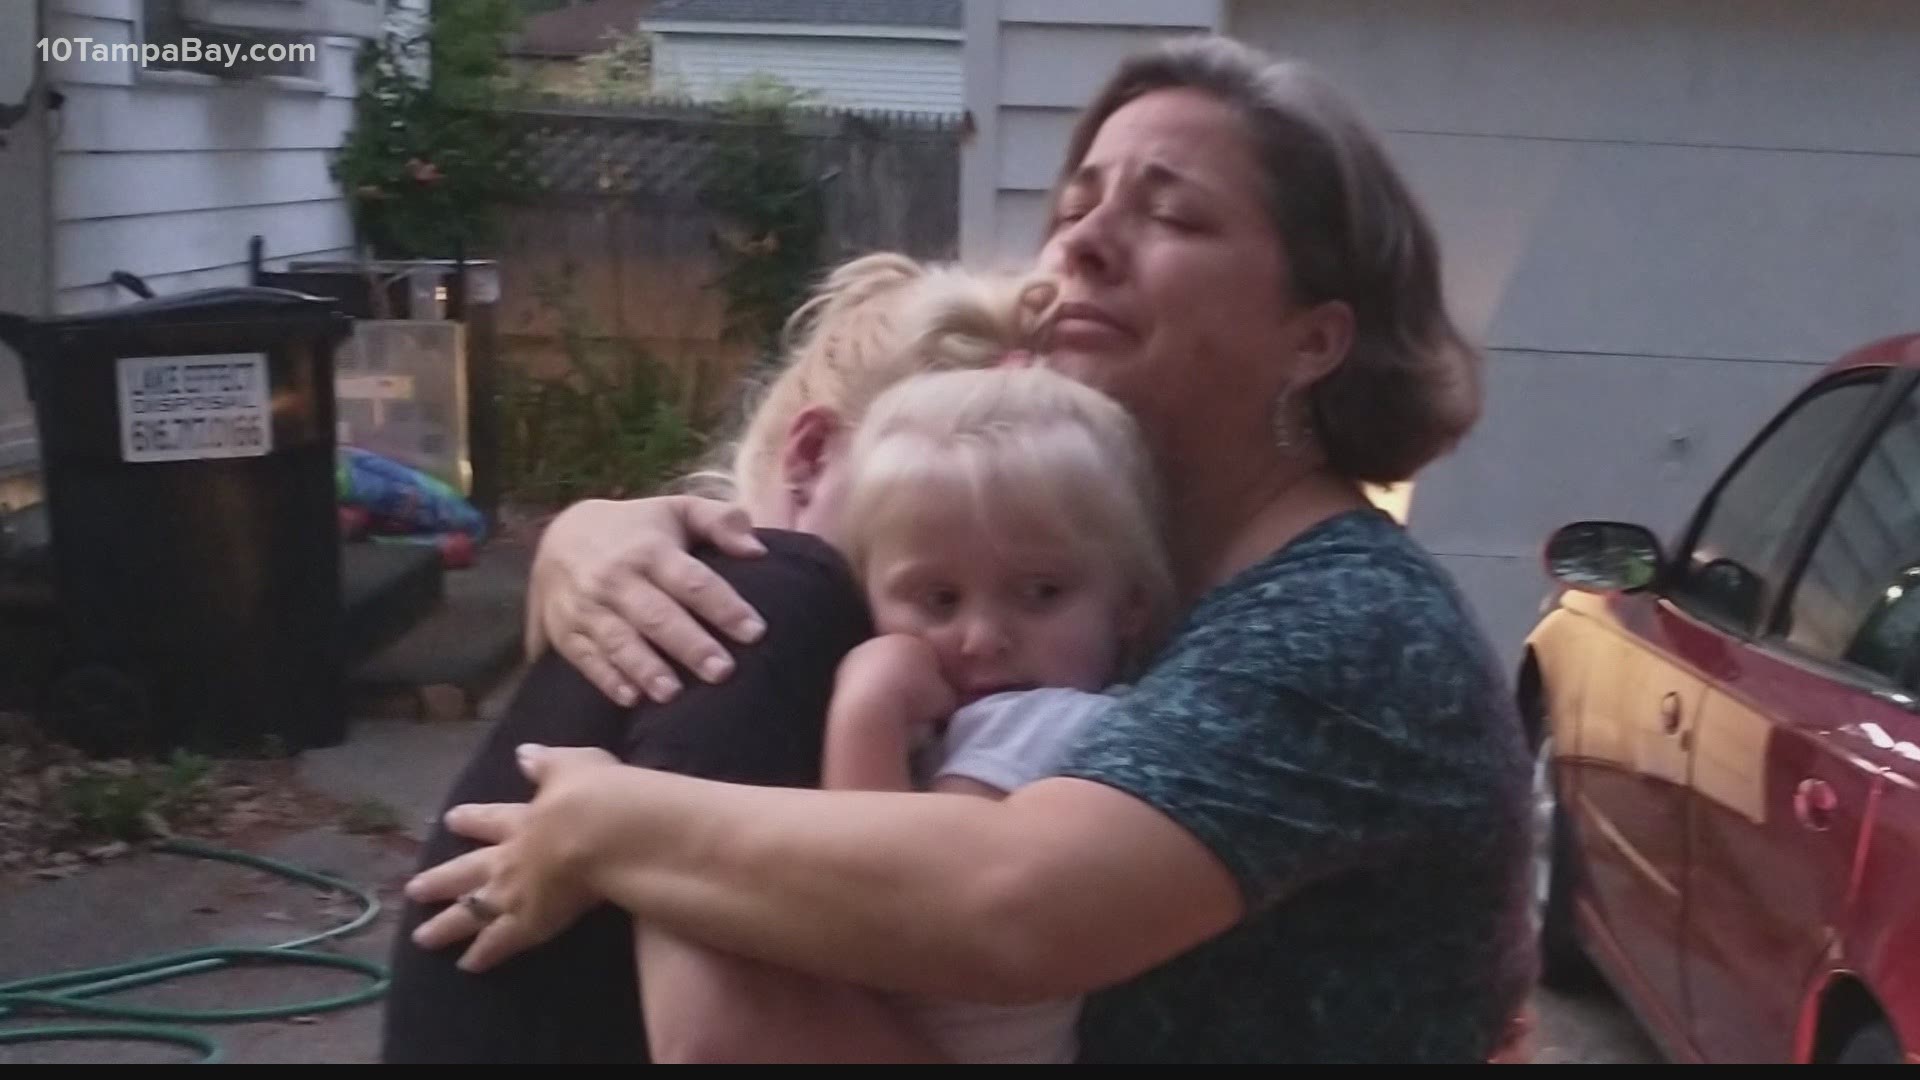 Beth Cole gave up her daughter for adoption in 1993. Now, 27 years later, they have reunited.